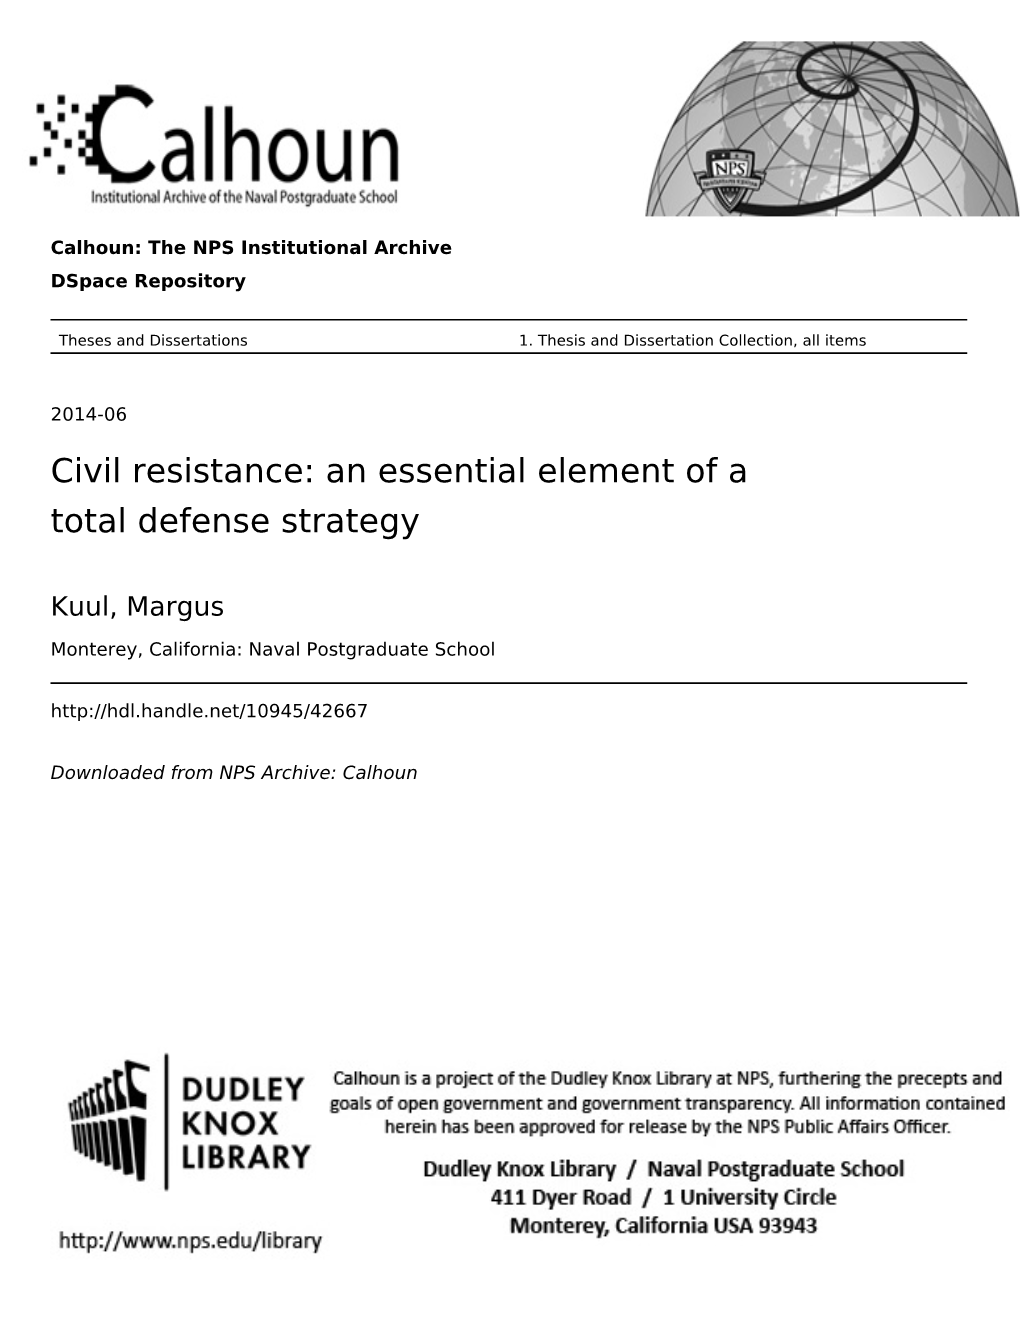 Civil Resistance: an Essential Element of a Total Defense Strategy